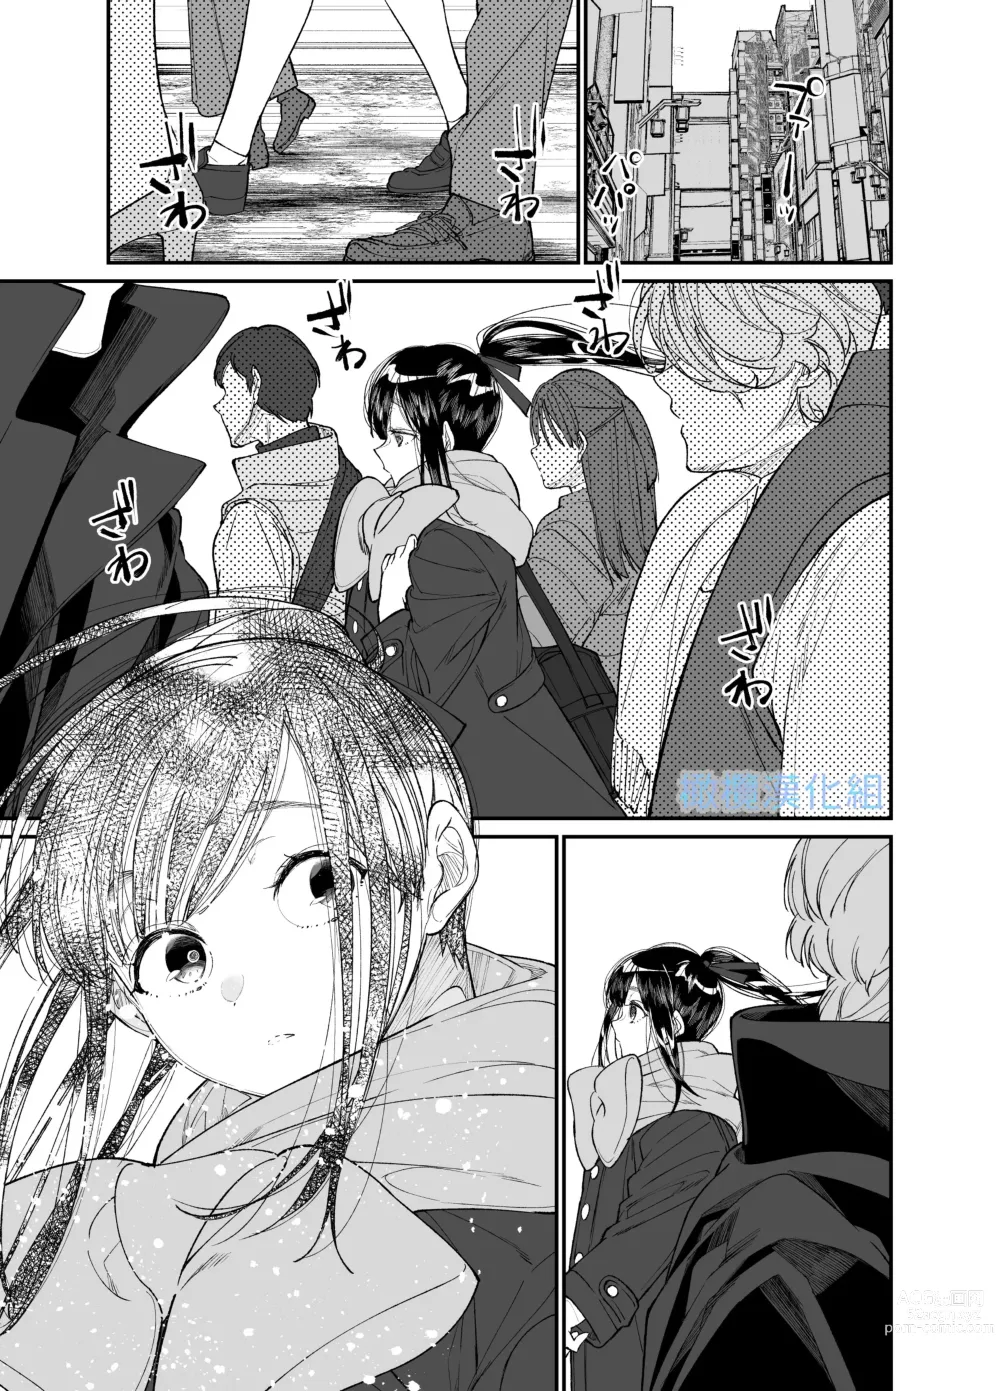 Page 63 of doujinshi Forbidden Heart Assassin-捡到了一个暗杀者。-